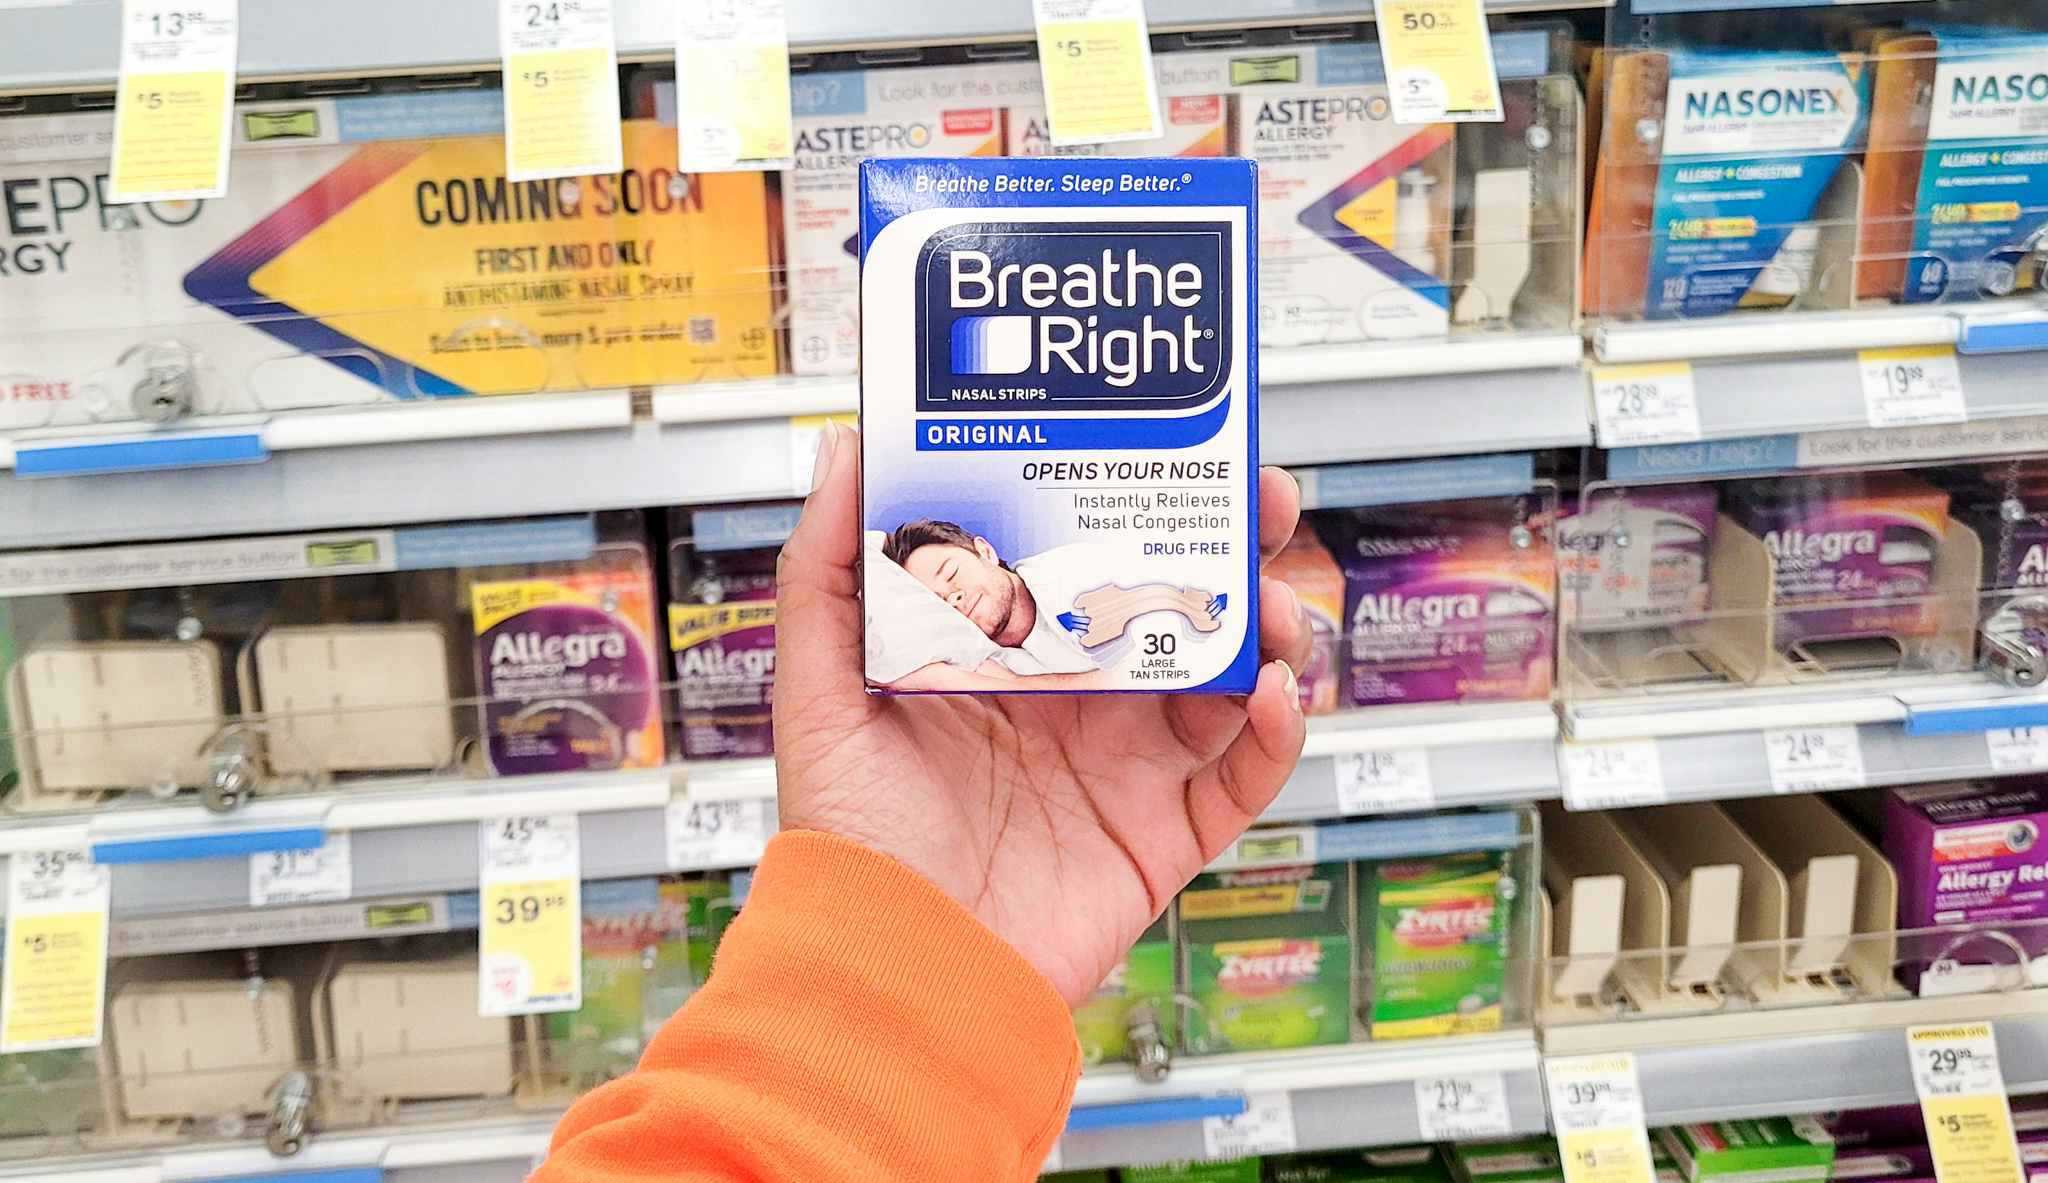 Breathe Right Nasal Strips 30-Pack, Only $6.78 on Amazon